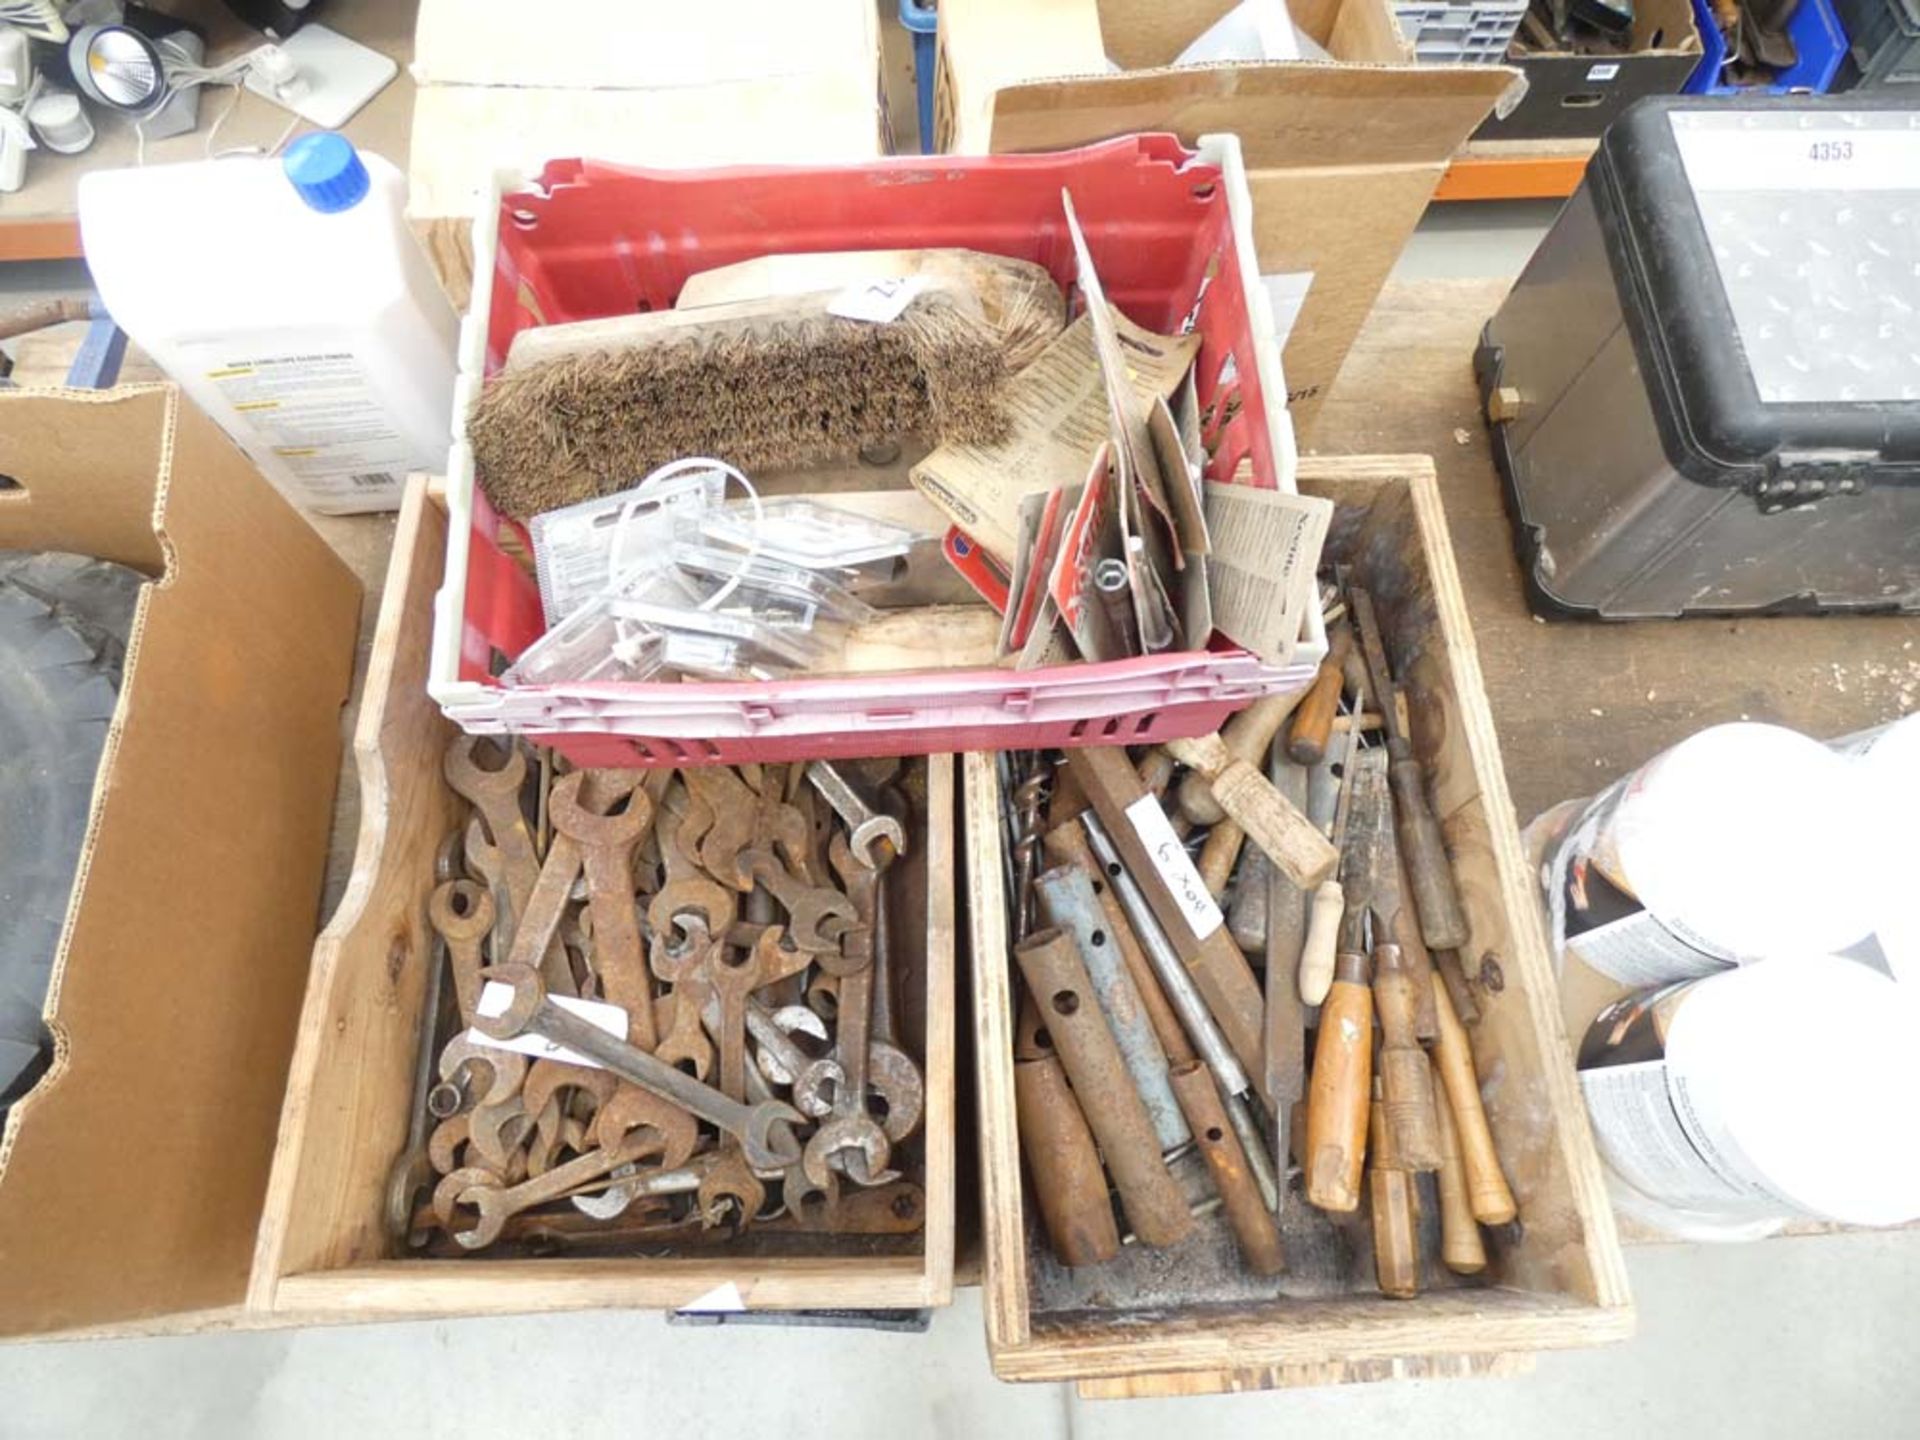 2 wooden boxes and a plastic box containing spanners, brushes, files, locks etc - Image 2 of 2